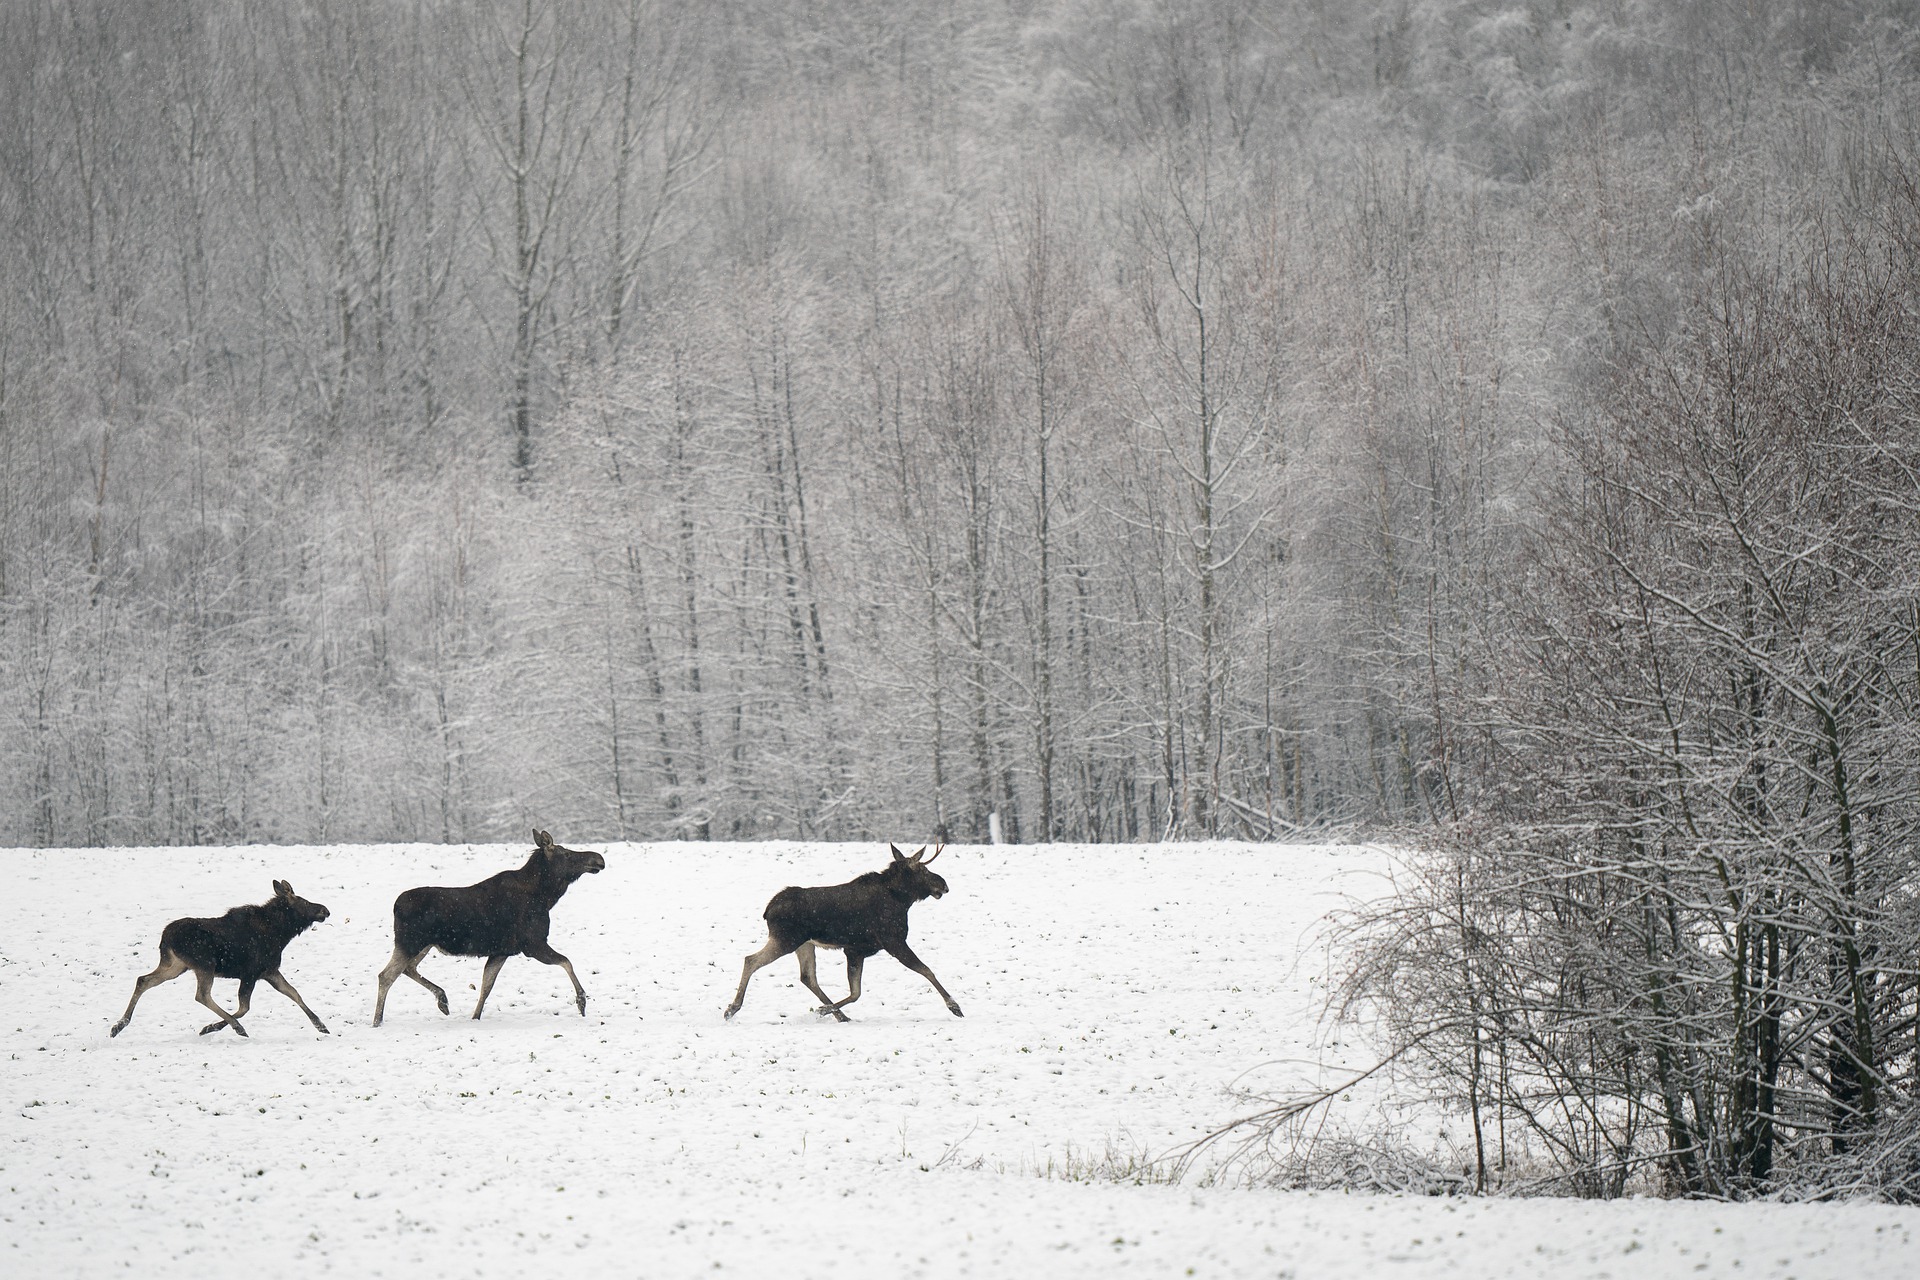 Vermont is proposing a special moose hunt to curtail its winter tick population.